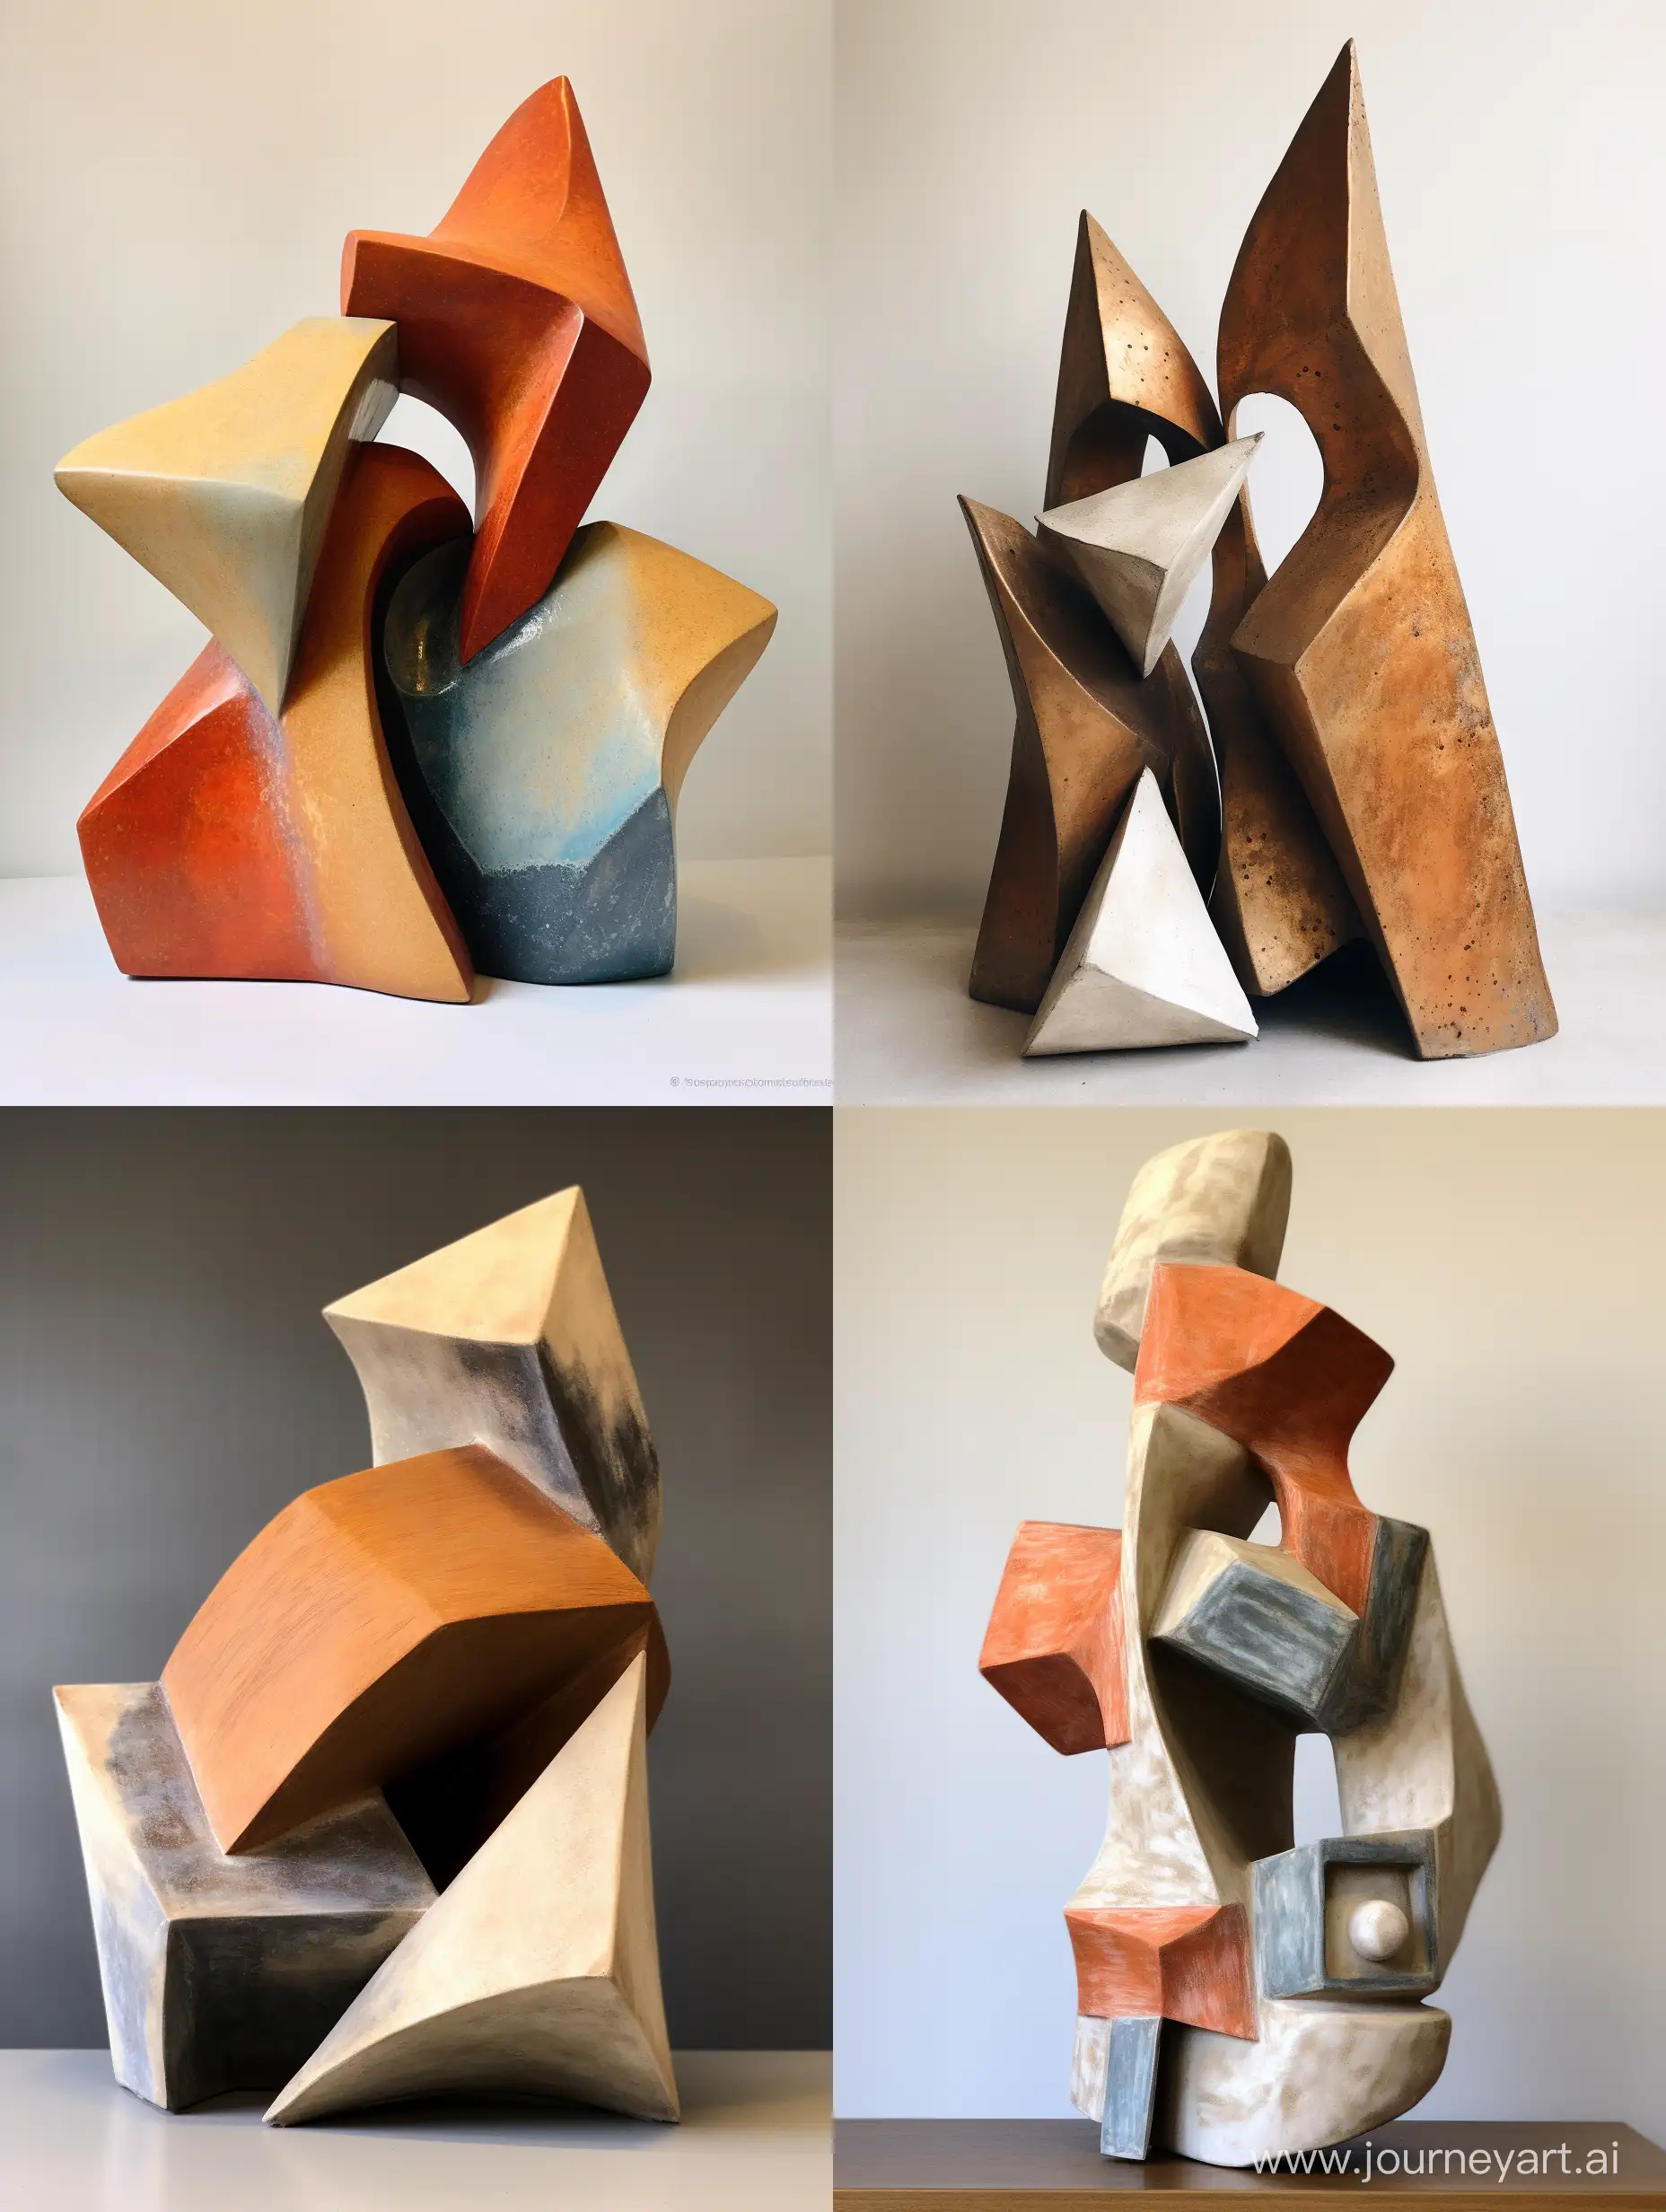 Muted-Geometric-Sculpture-Abstract-Forms-in-60s-Style